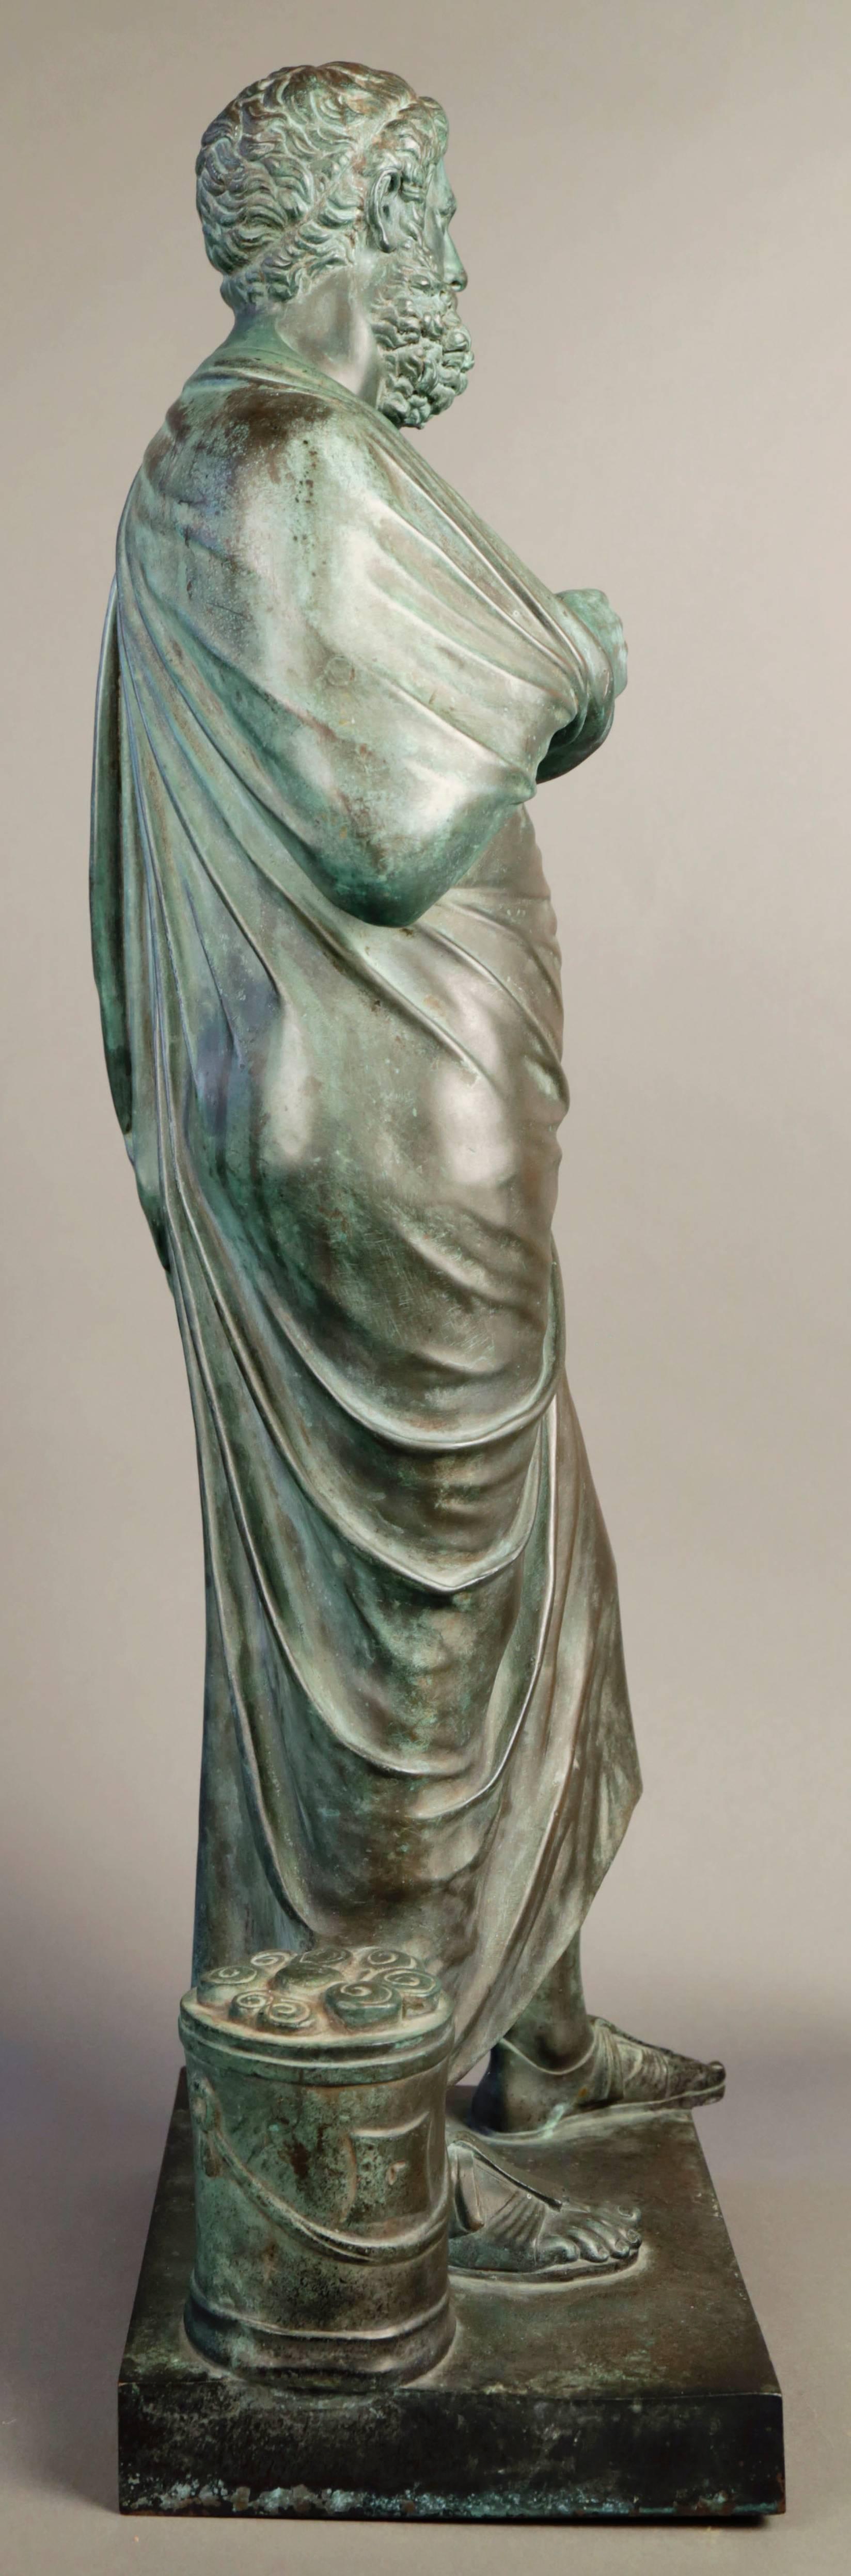 Bronze Figure of Sophocles - Sculpture by Unknown